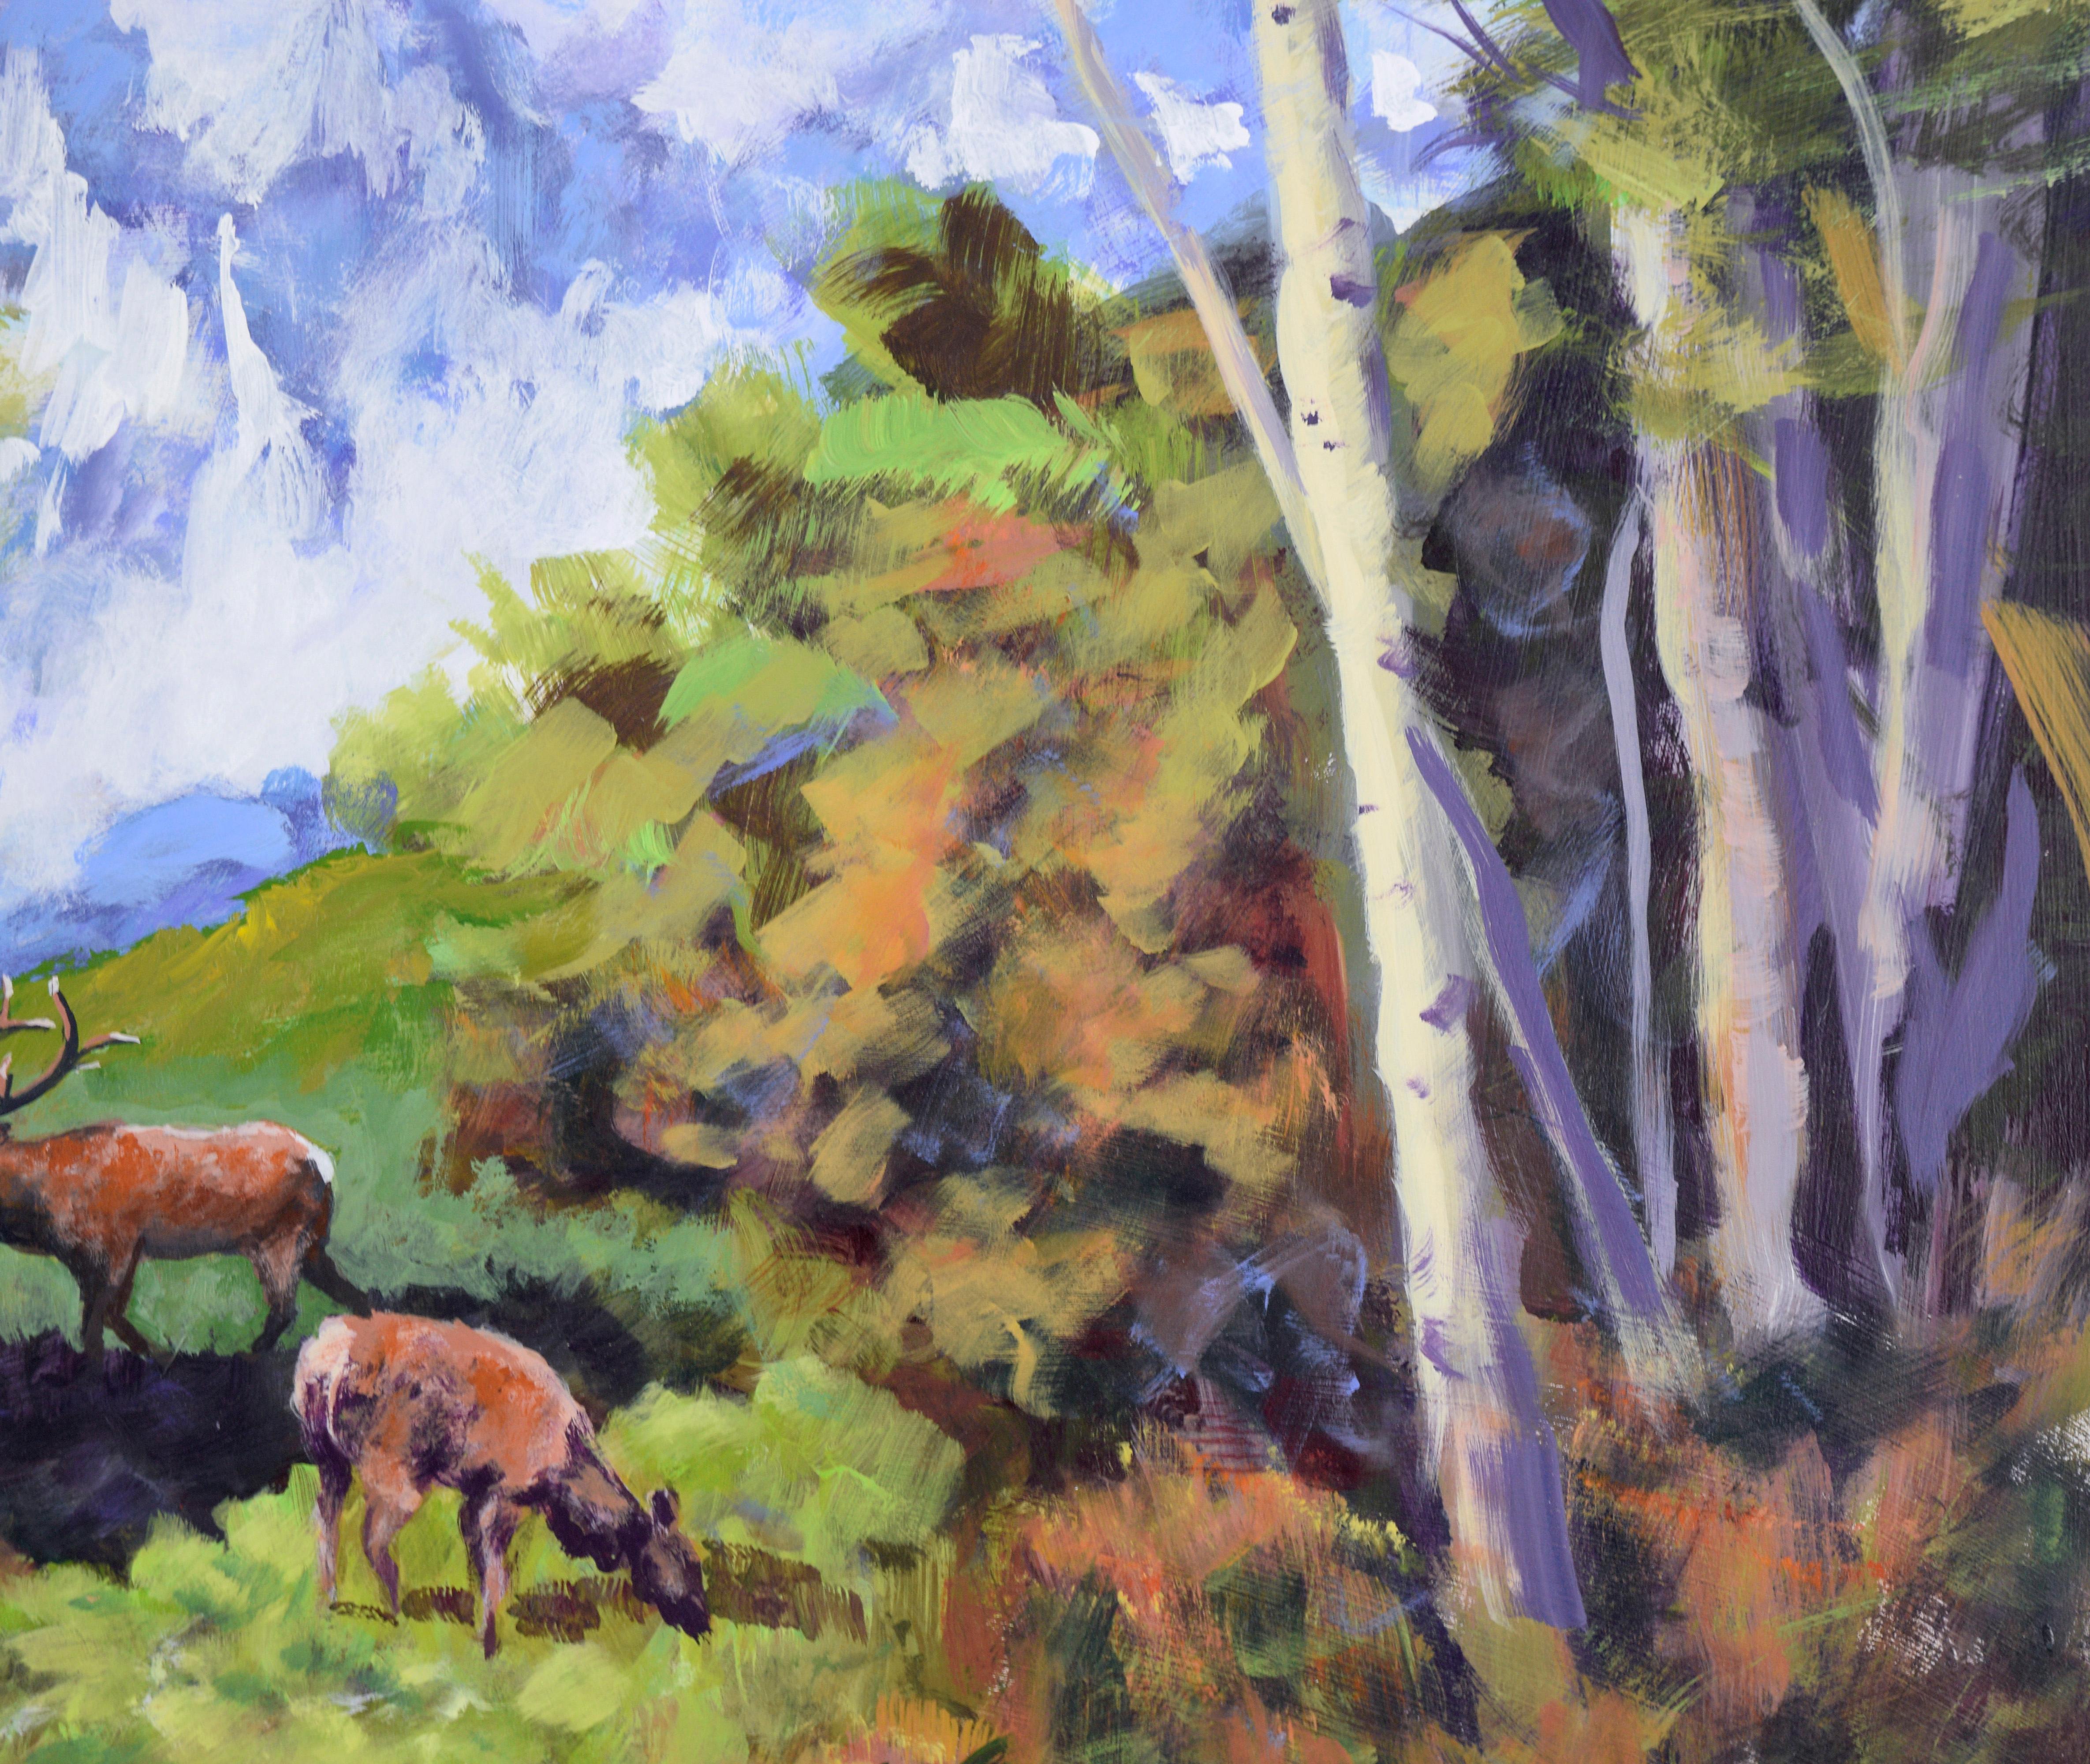 Elk in the Forest - Plein Aire Landscape in Acrylic on Board

Lush Western landscape by California Plein Aire artist Nick White (American, 1943-2009). Several elk are grazing in a clearing, one of which has a full rack of antlers. There are green